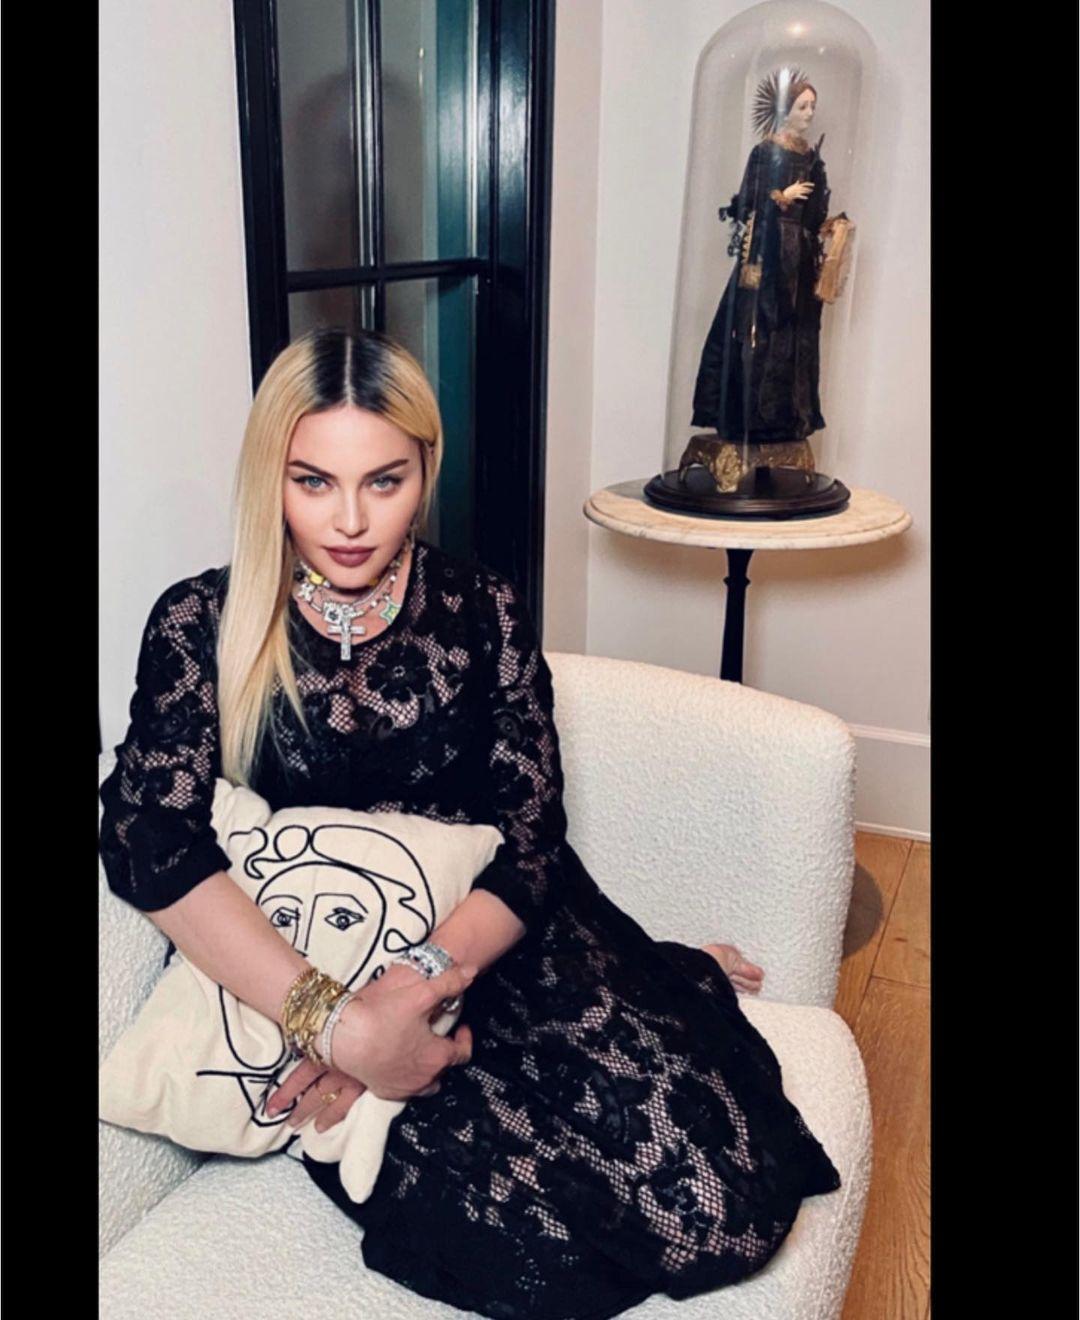 A photo of Madonna sitting on a sofa in a black lace dress.